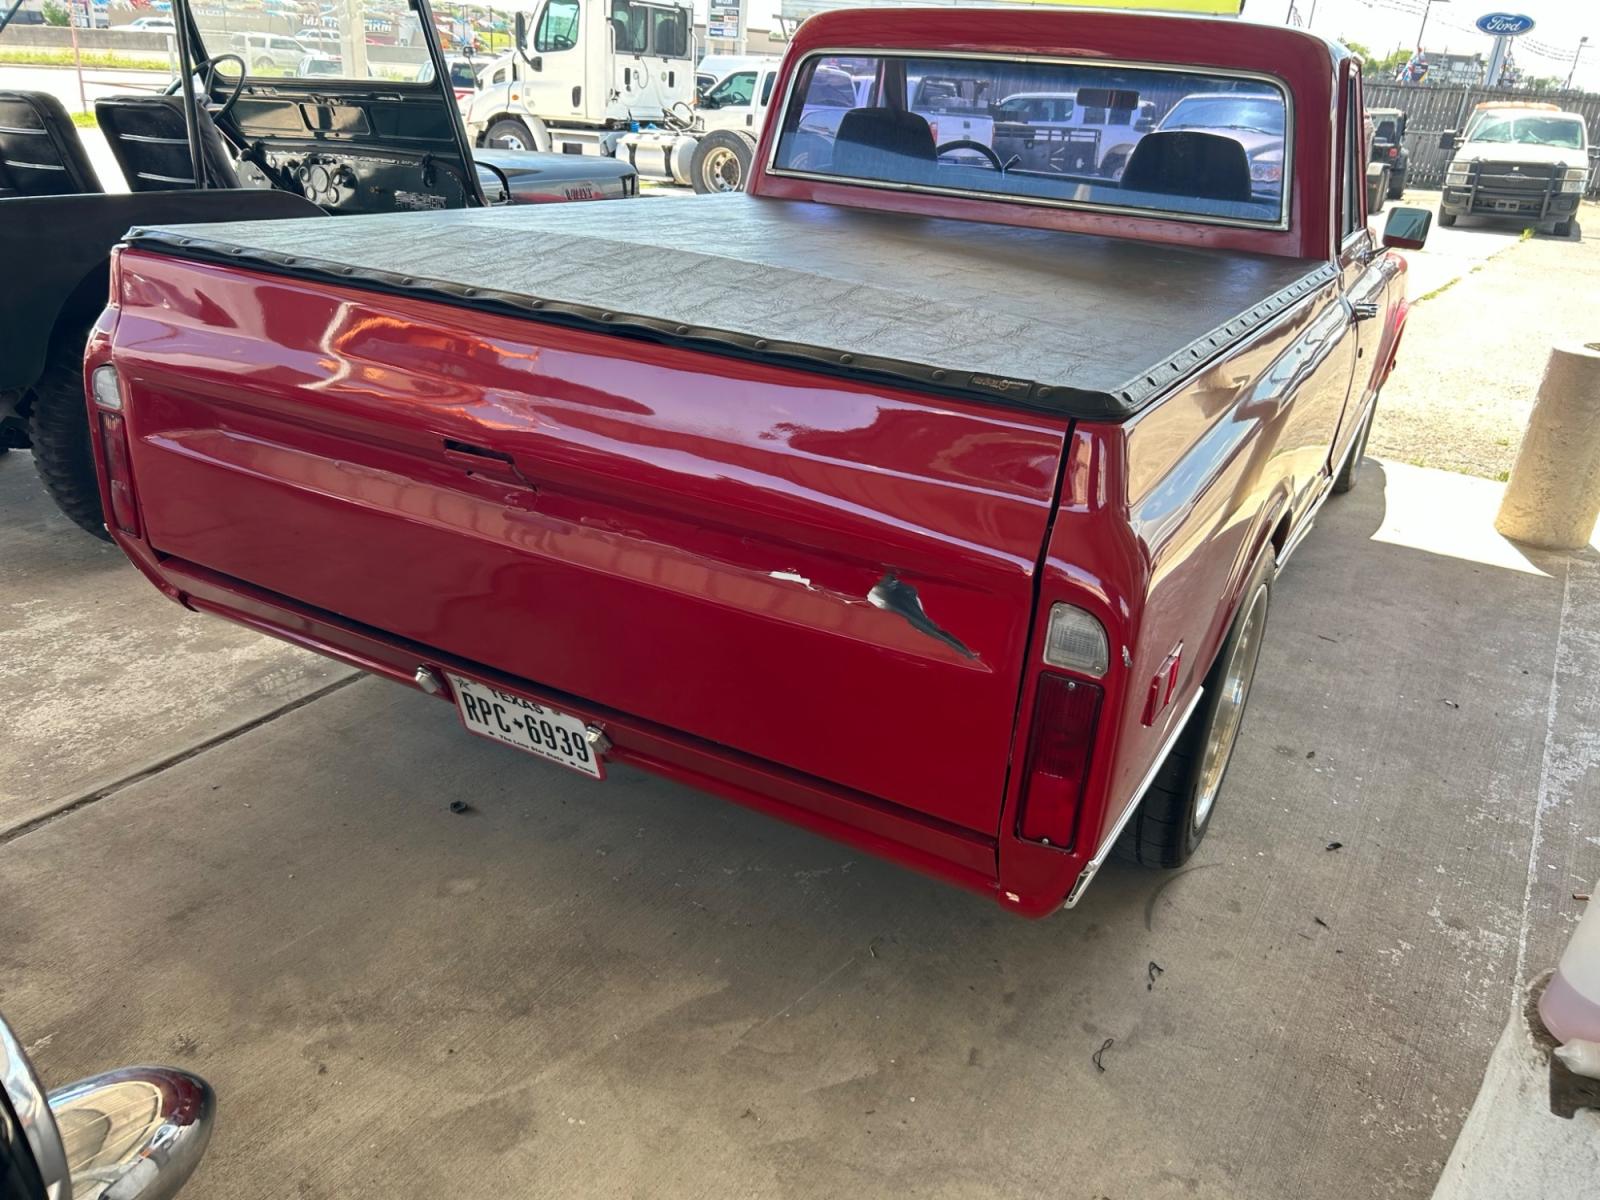 1972 Red Chevrolet C10 (CCE142A1201) , Automatic transmission, located at 1687 Business 35 S, New Braunfels, TX, 78130, (830) 625-7159, 29.655487, -98.051491 - 580 Horse Power - Photo #3